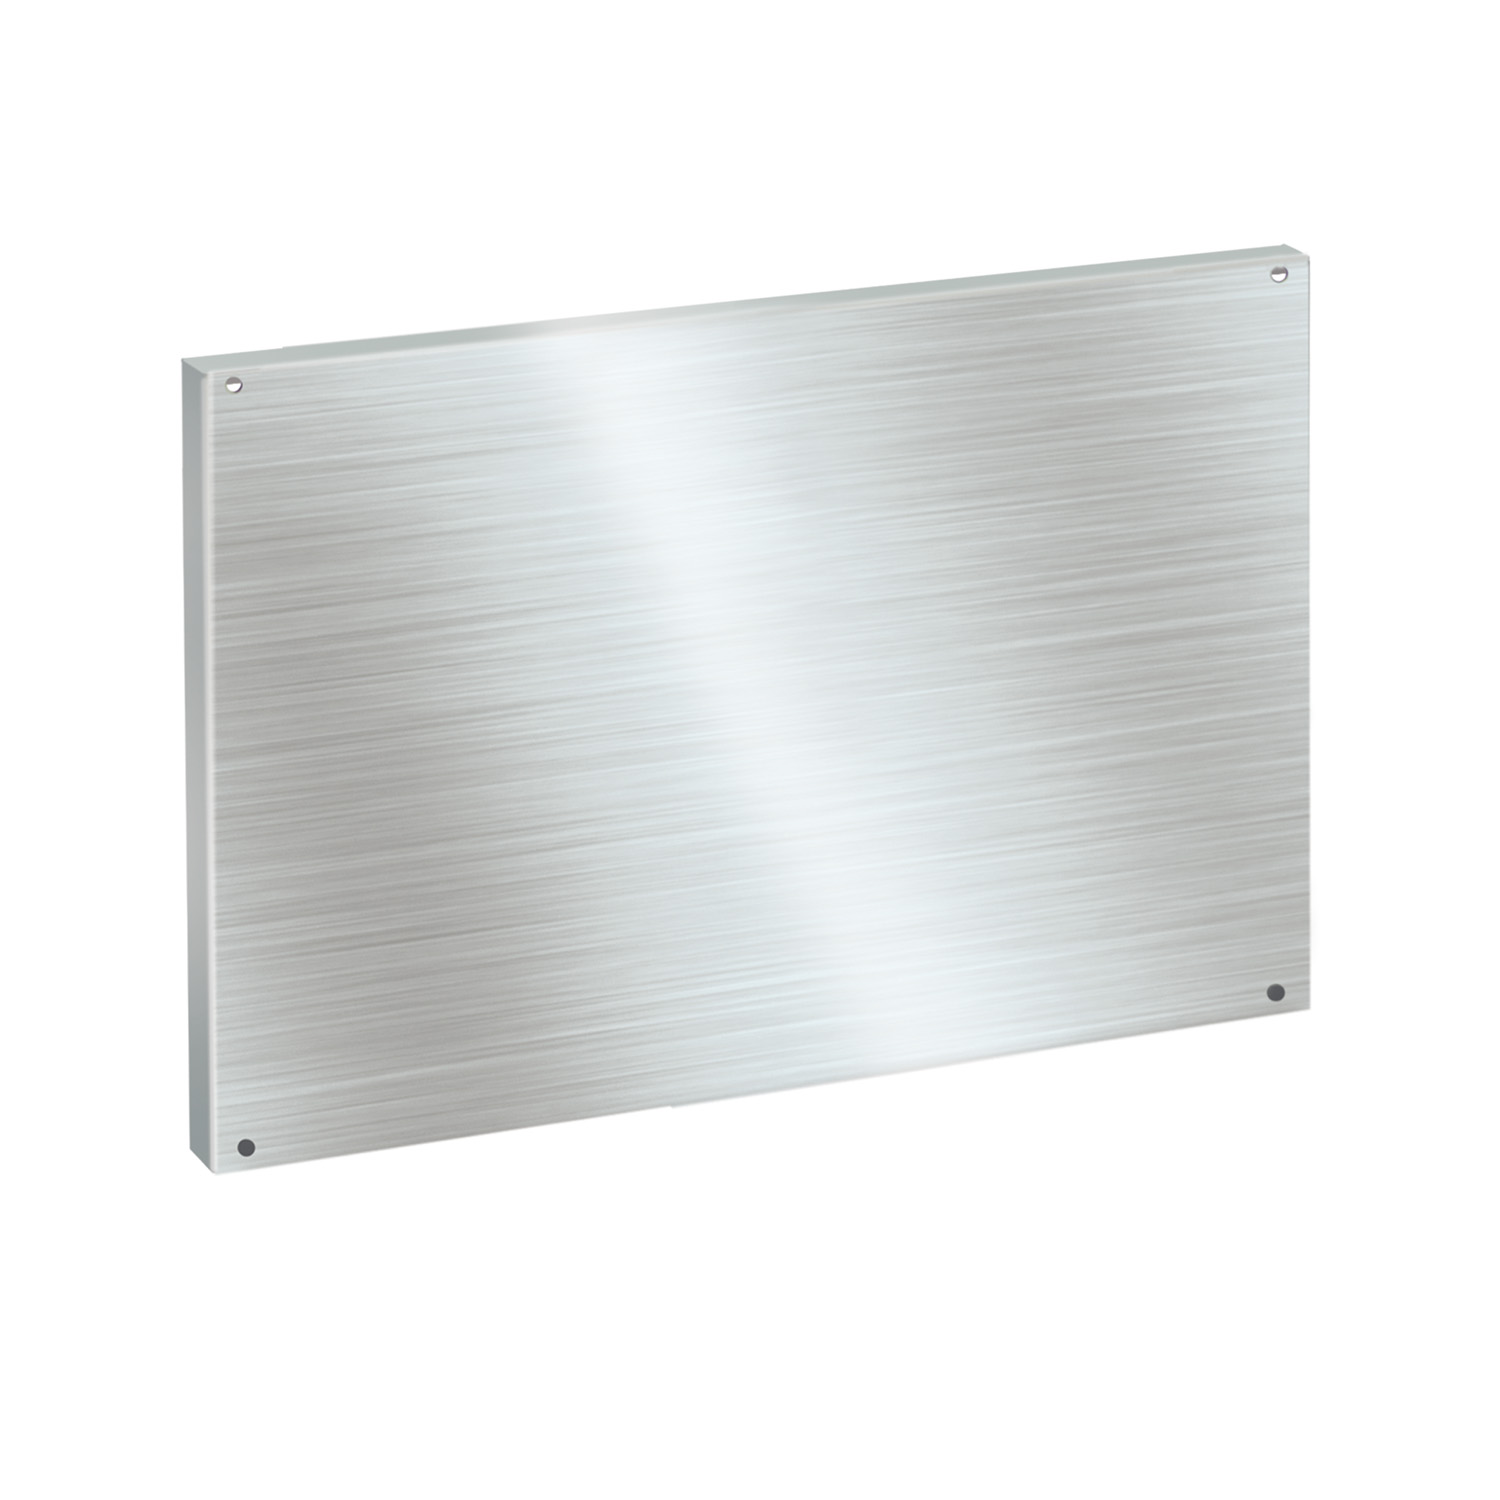 Stainless steel back panel (440 x 600mm)